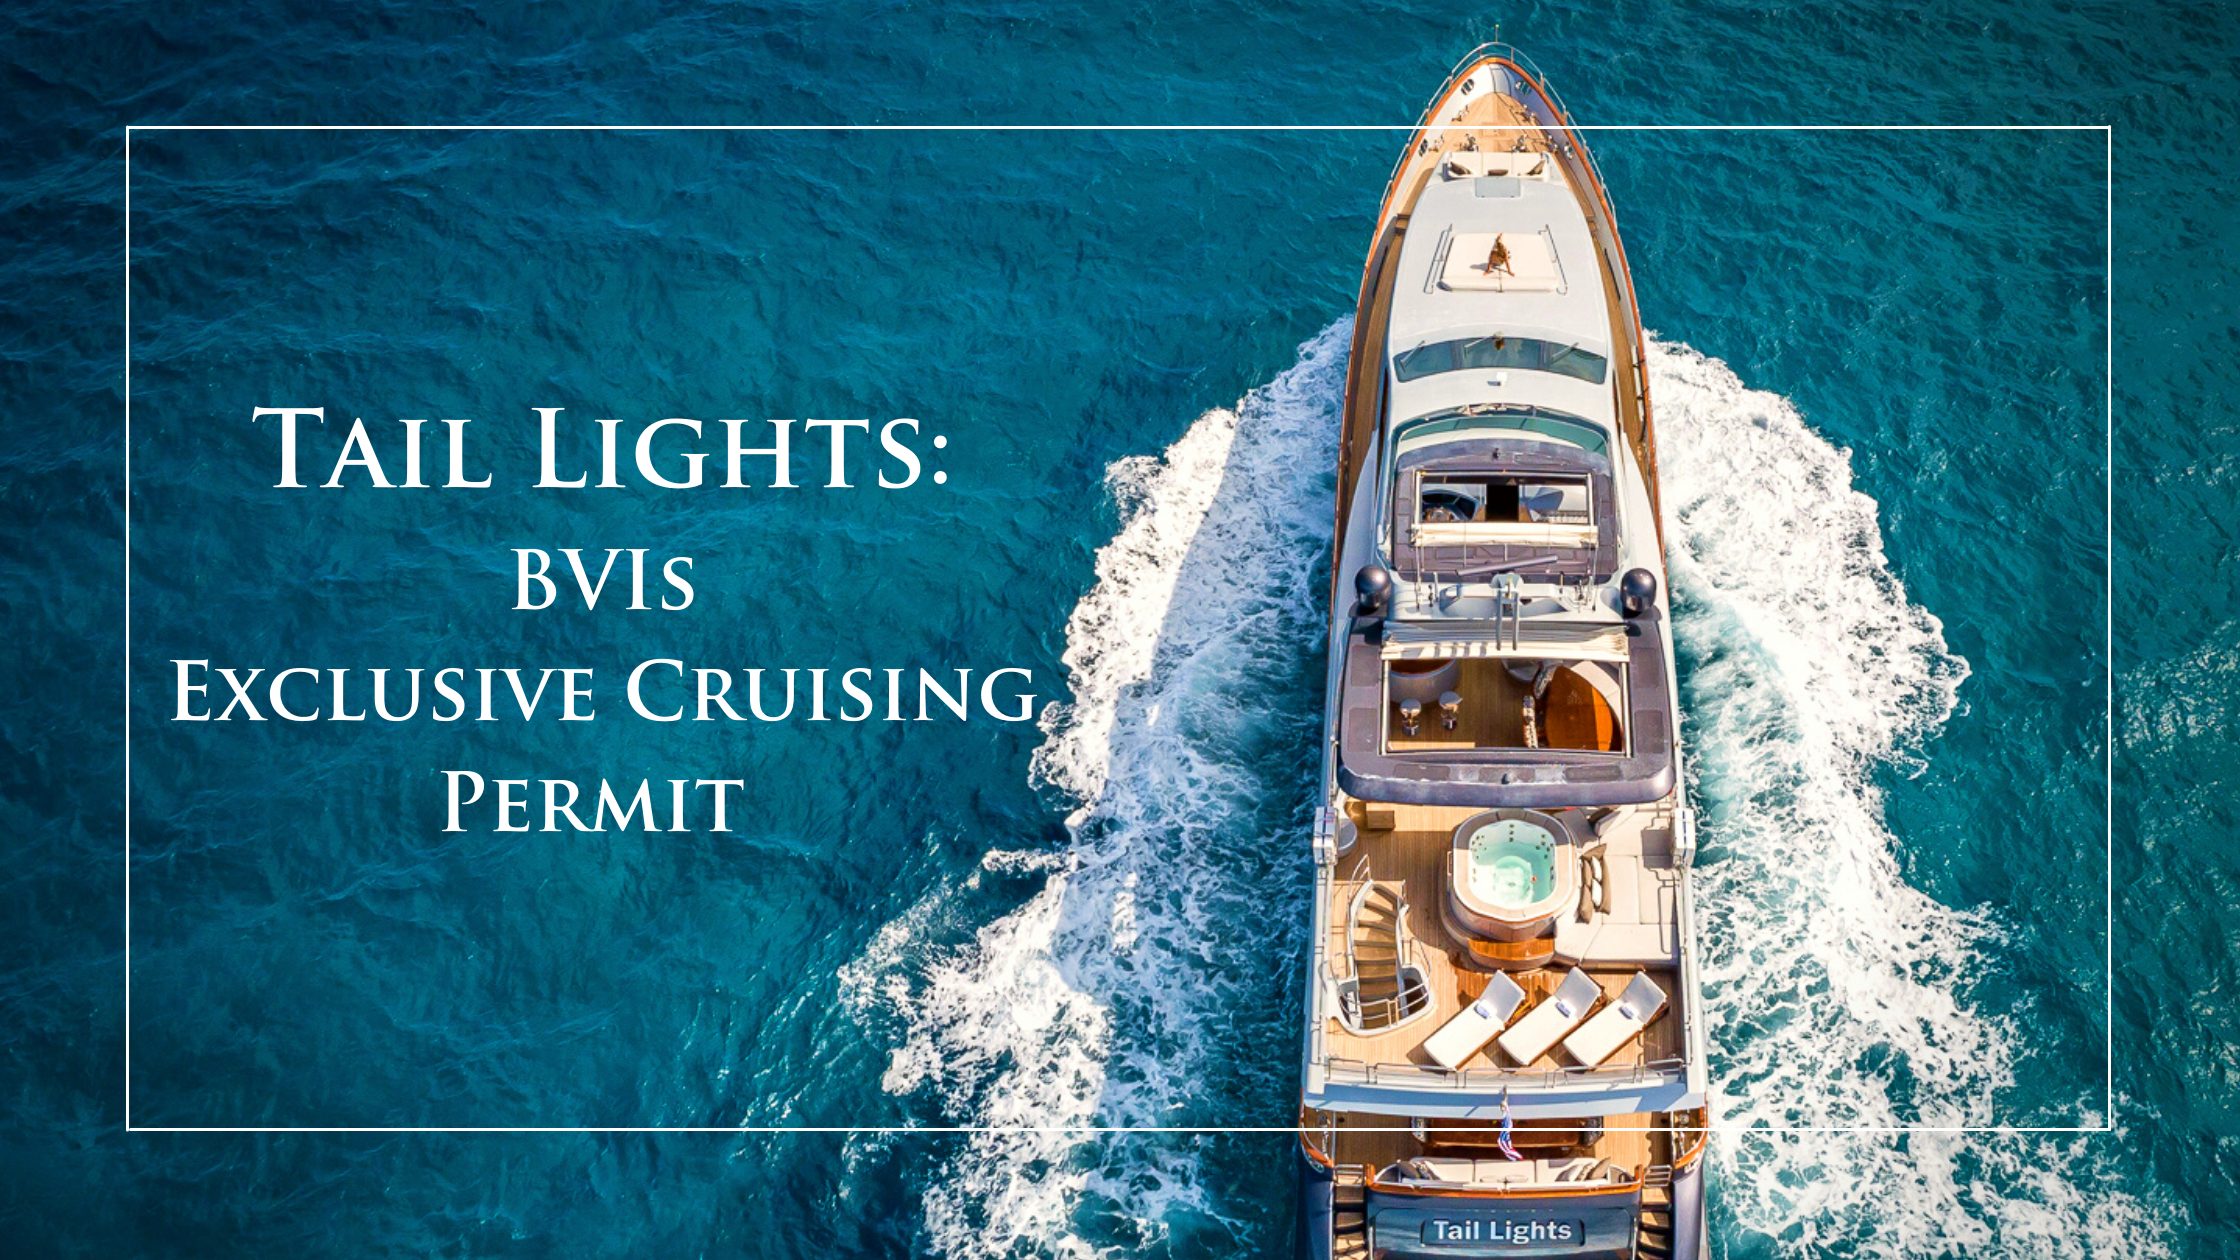 Experience Elegance & Exclusivity Aboard “Tail Lights” with a Charter in the British Virgin Islands